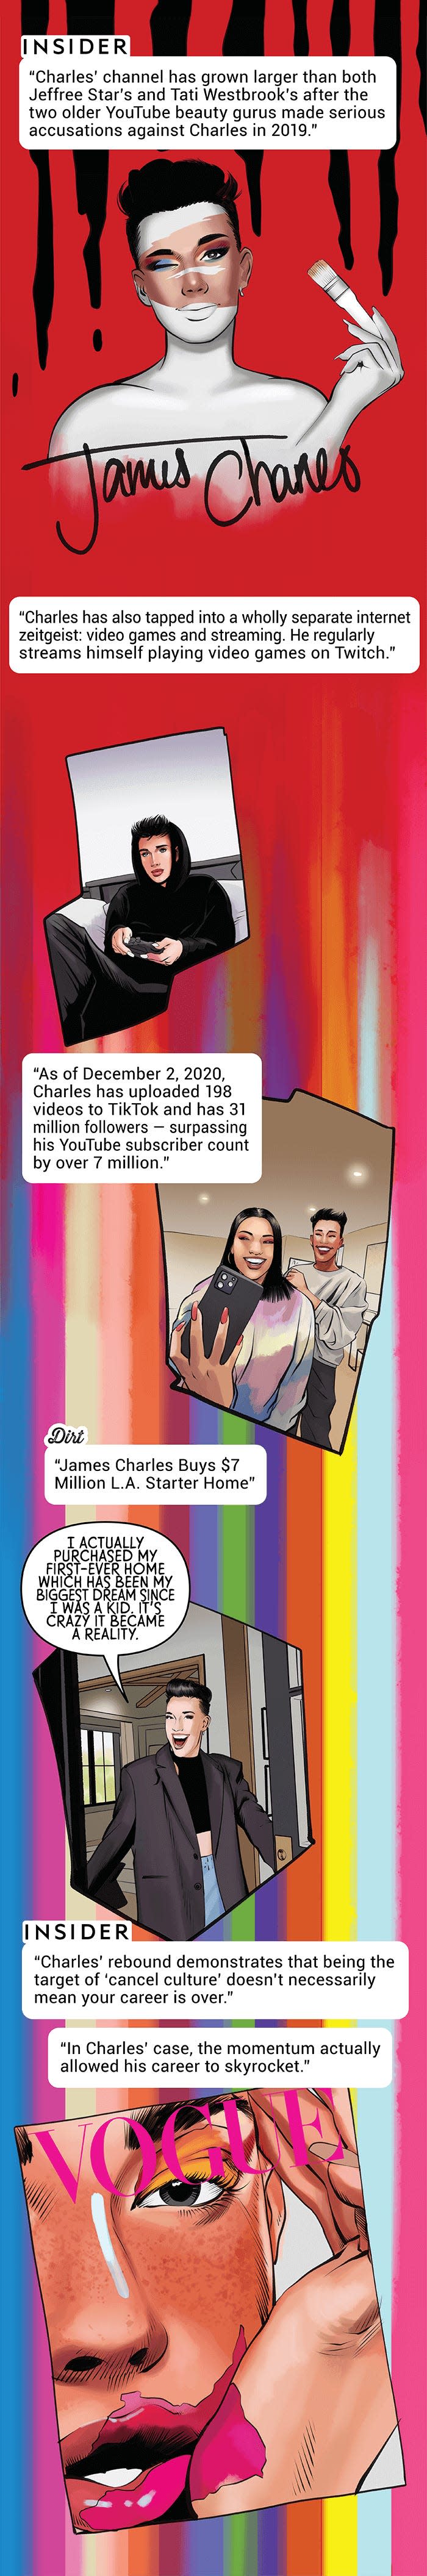 In the months after ‘No More Lies,’ Charles’ channel grew larger than both Jeffree Star’s and Tati Westbrook’s.   He regularly streamed himself playing video games on Twitch, and by December 2020, Charles has uploaded 198 videos to TikTok. On Tiktok, he has 31 million followers - 7 million more than he has on YouTube. He bought a $7 Million home in LA.   He became living proof that when you’re an influencer, being the target of ‘cancel culture’ doesn’t necessarily mean your career is over - in Charles’ case, the momentum actually allowed his career to skyrocket.”